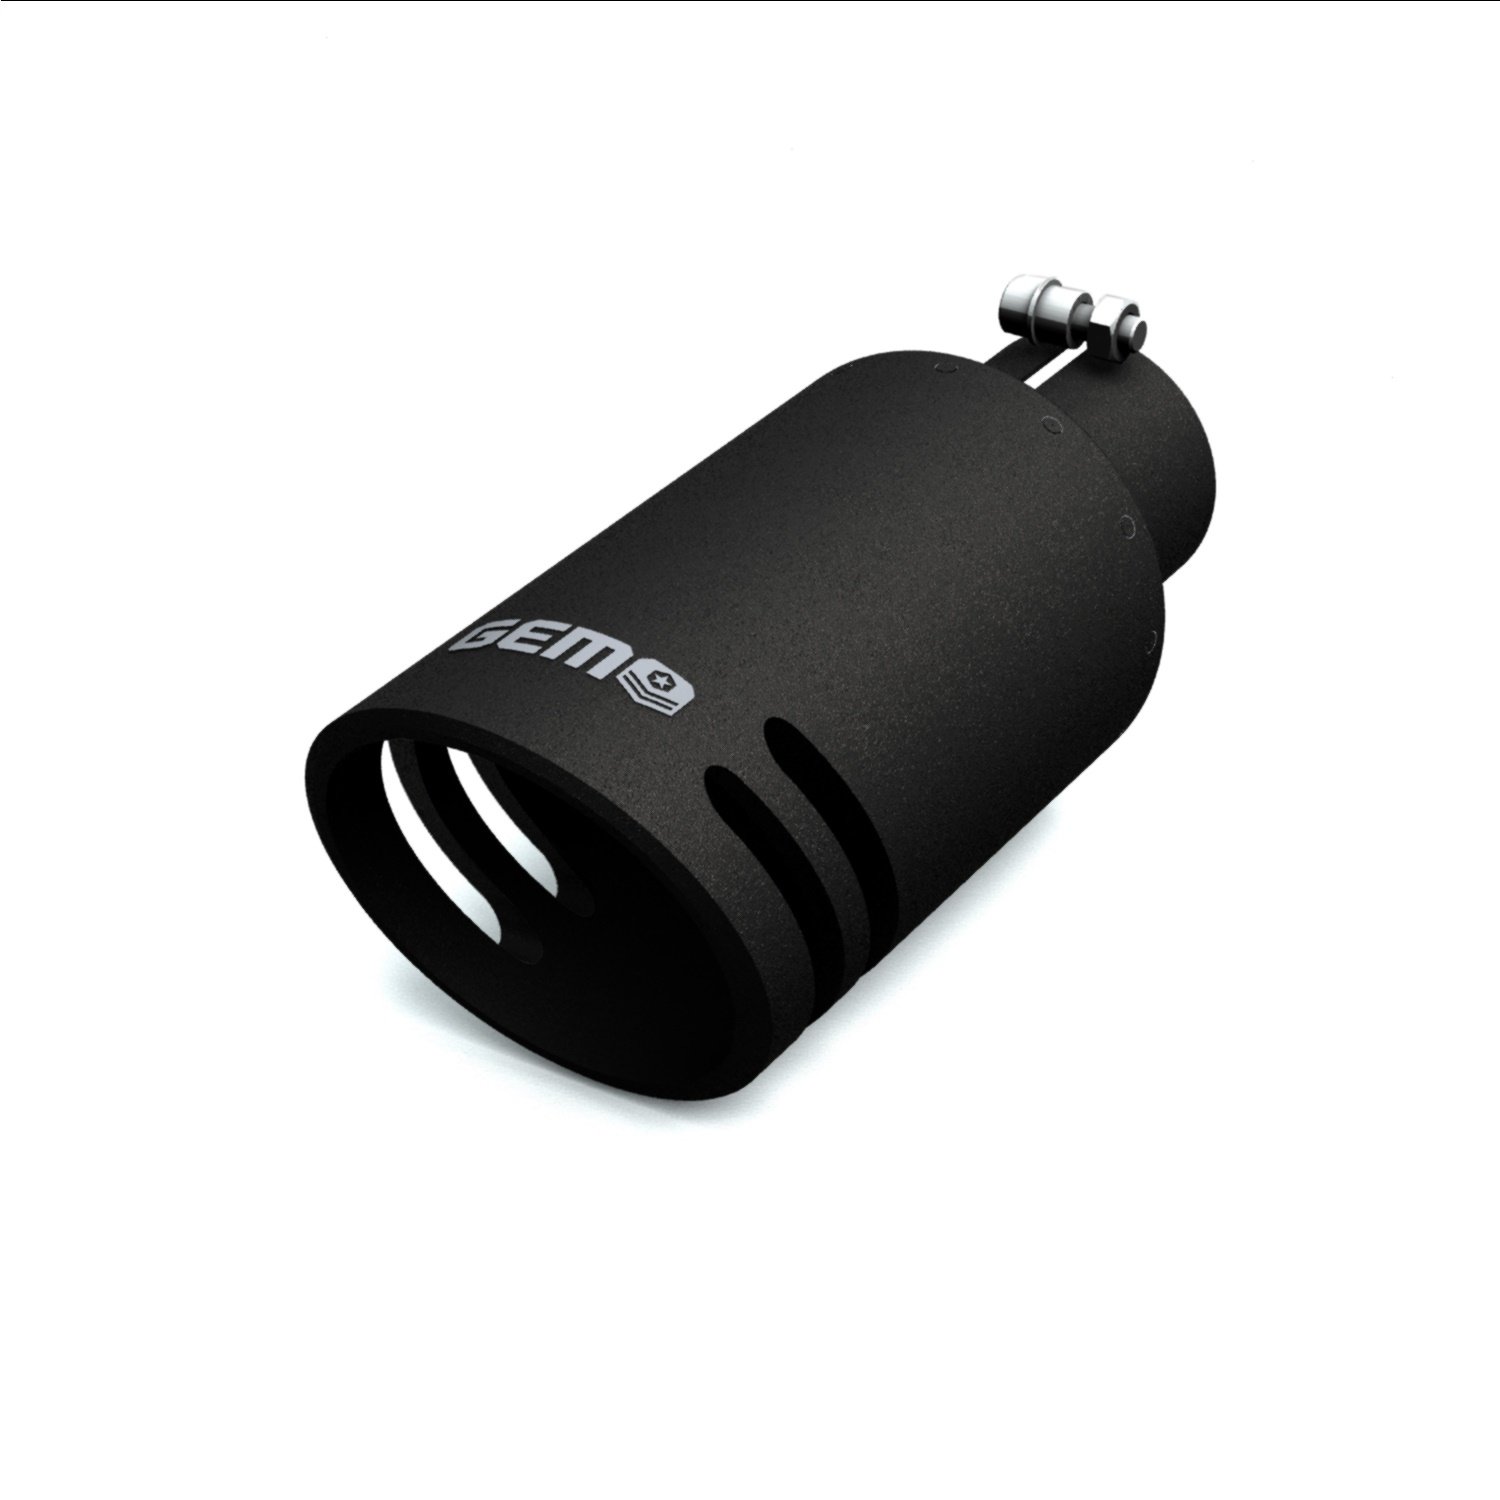 GEM Billet Exhaust Tip, 3.5 in. Inlet/5 in. Outlet x 12 in. Length, Aluminum/304 Stainless Steel, SILENCER Cut [Black Finish]